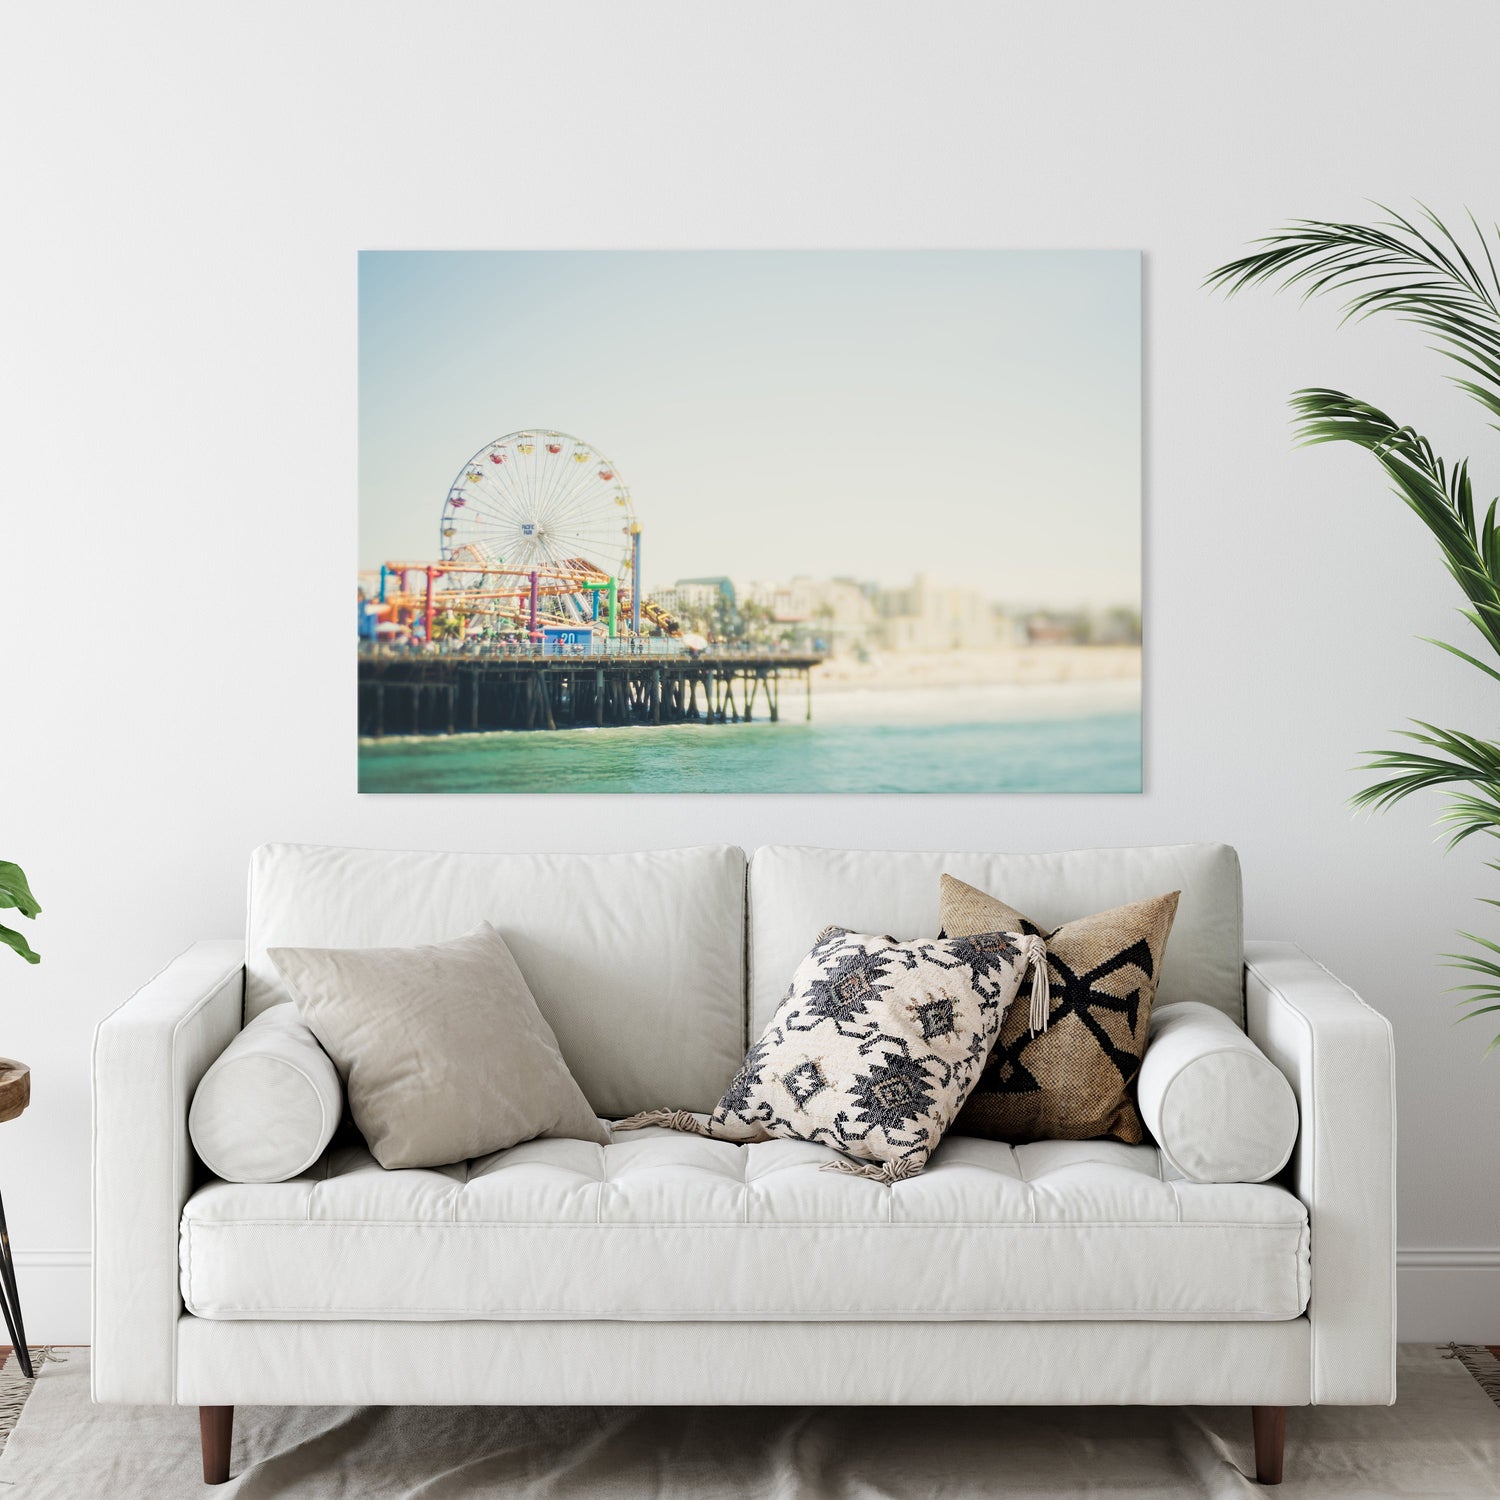 A Canvas of a Photograph of Santa Monica Pier hung over a Couch